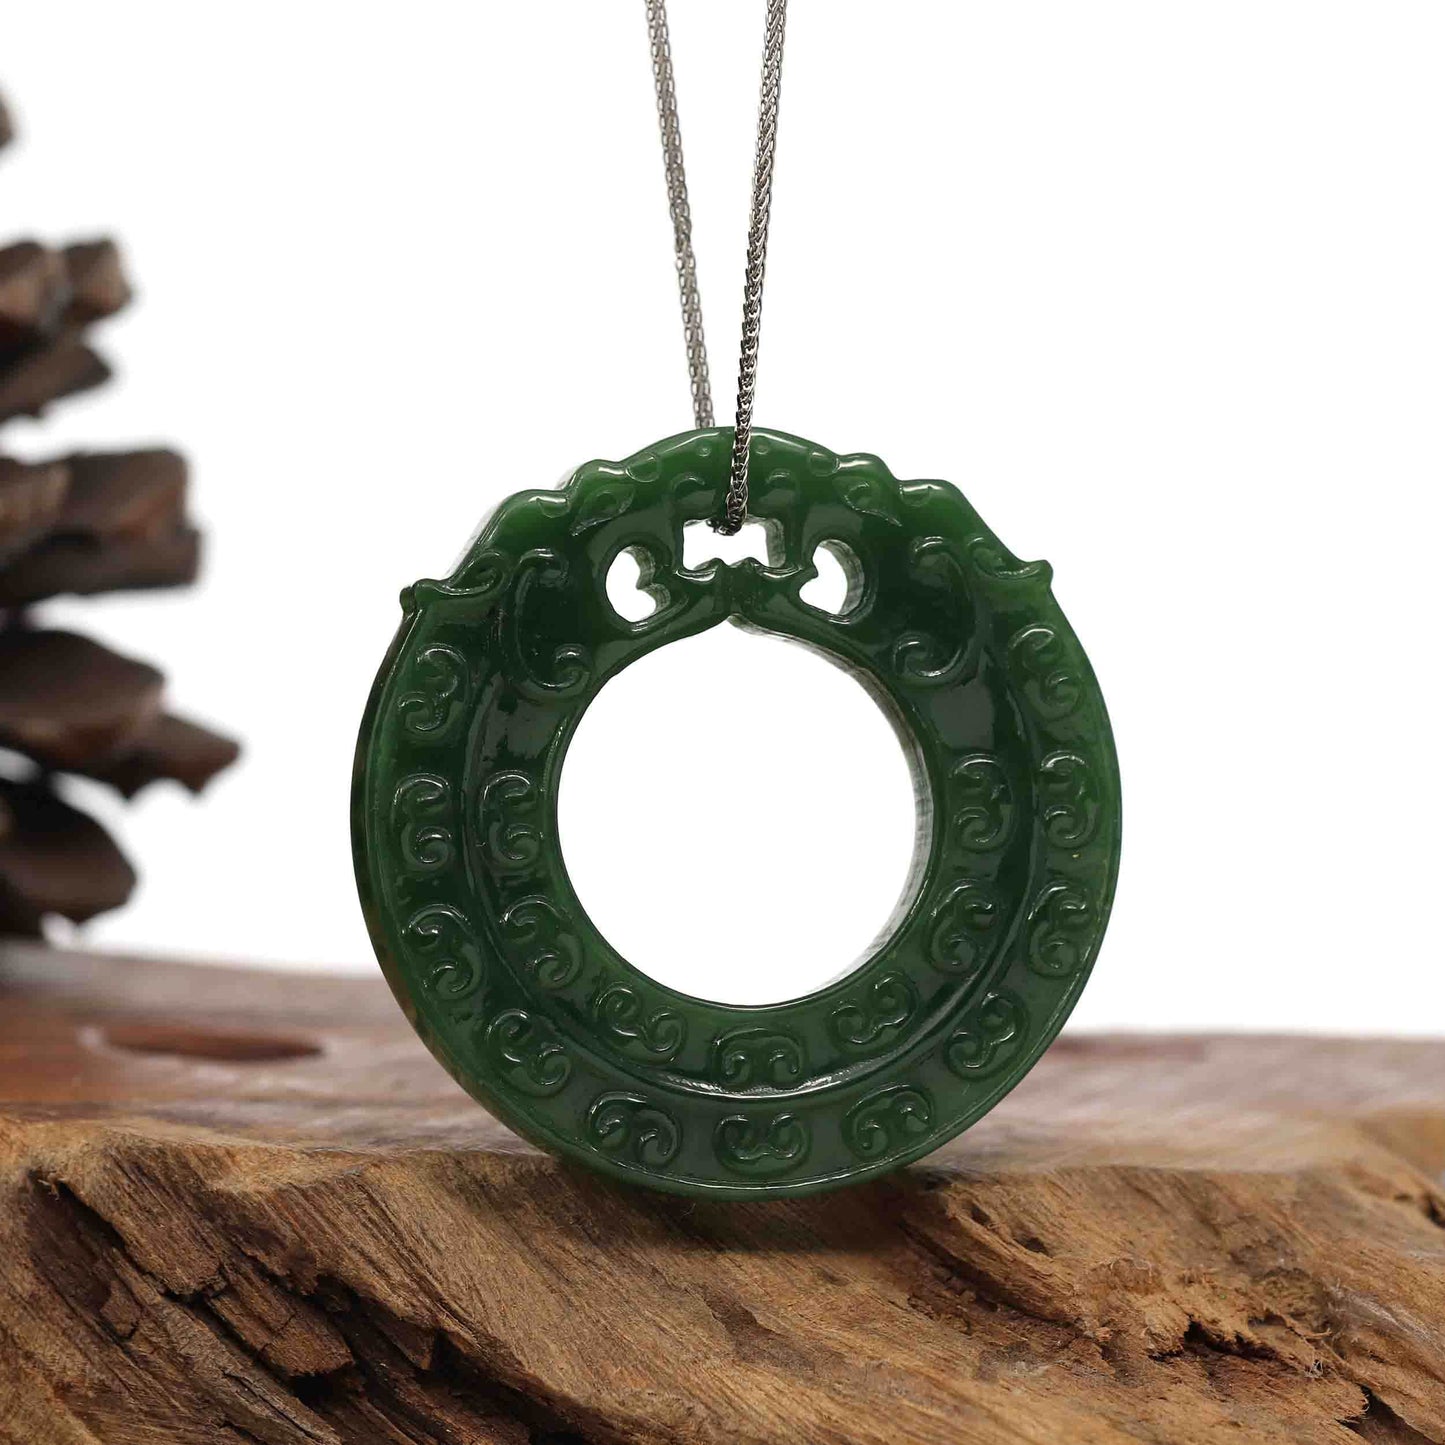 RealJade® Co. RealJade® Co. " Double Dragon Good Fortune" Carving Pendant Necklace Natural Nephrite Jade